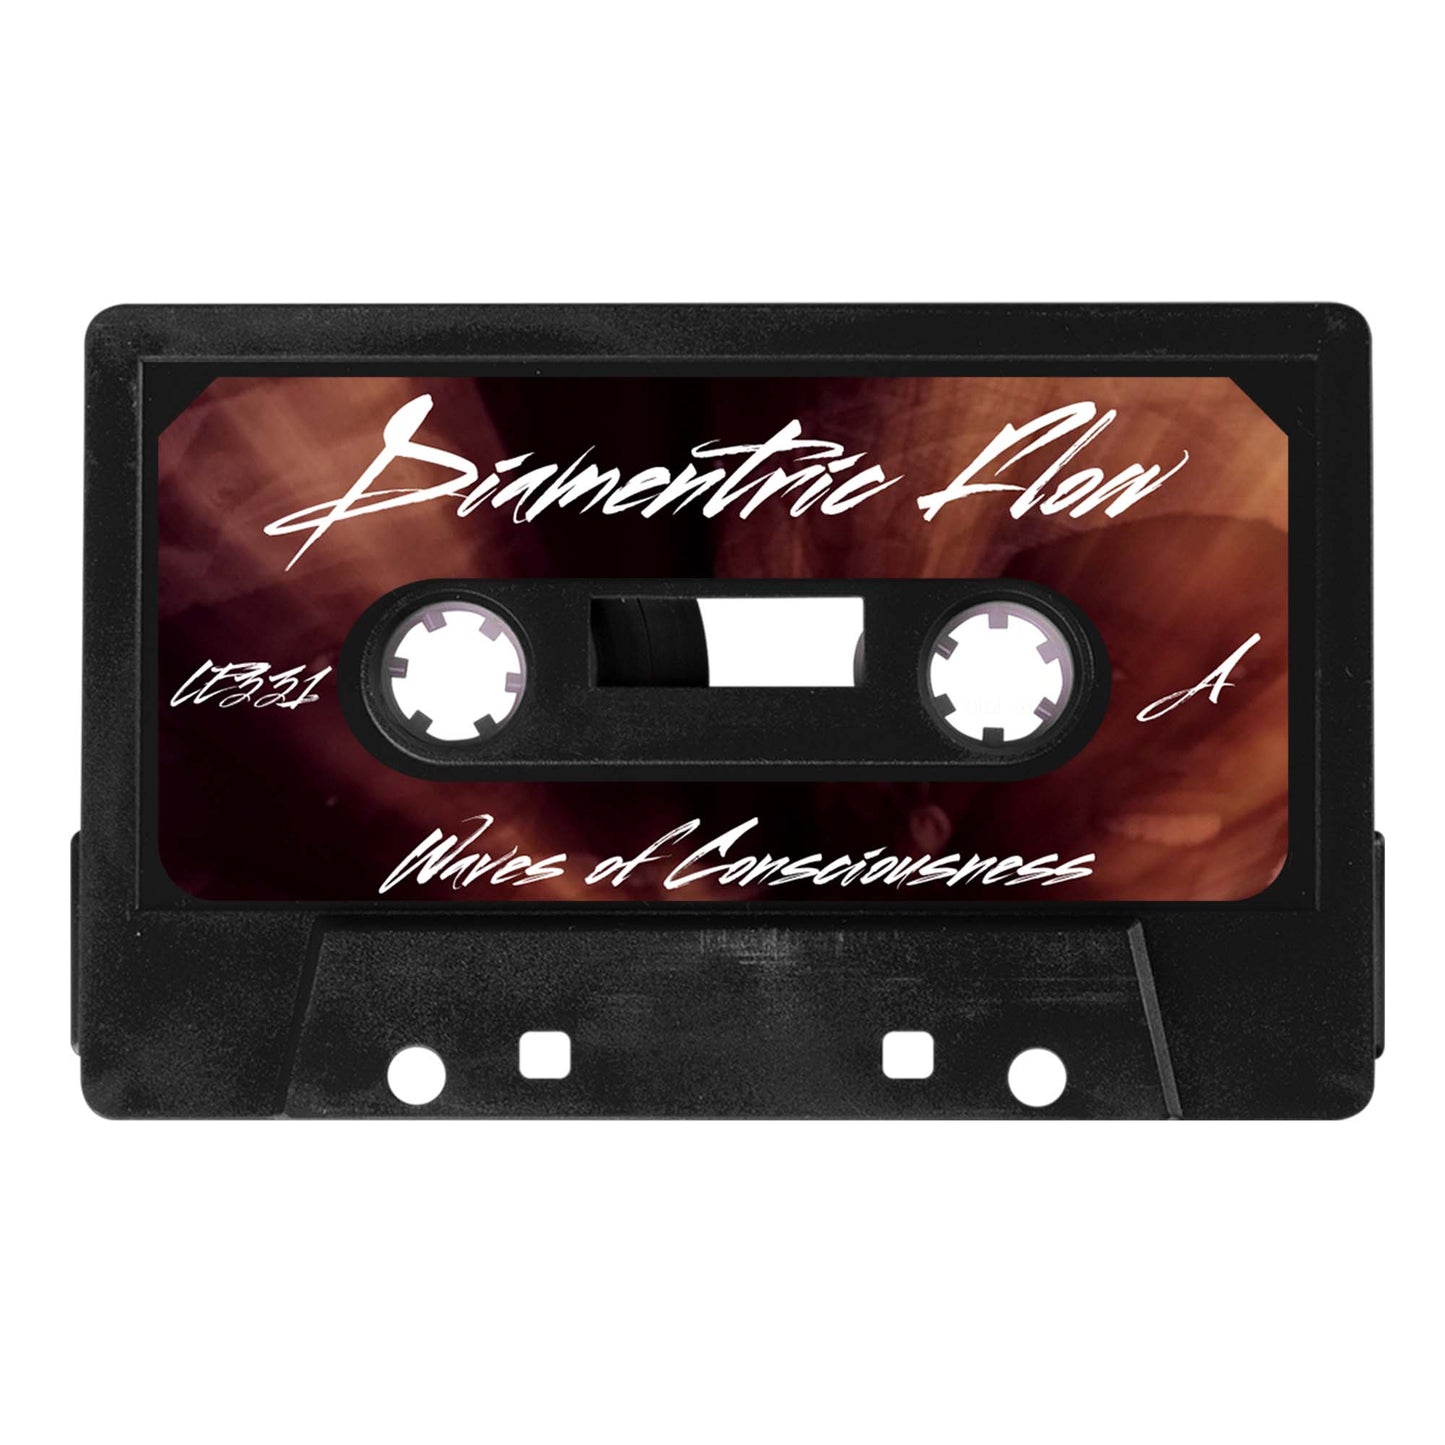 Diametric Flow - “Waves Of Consciousness” Limited Edition Cassette Tape